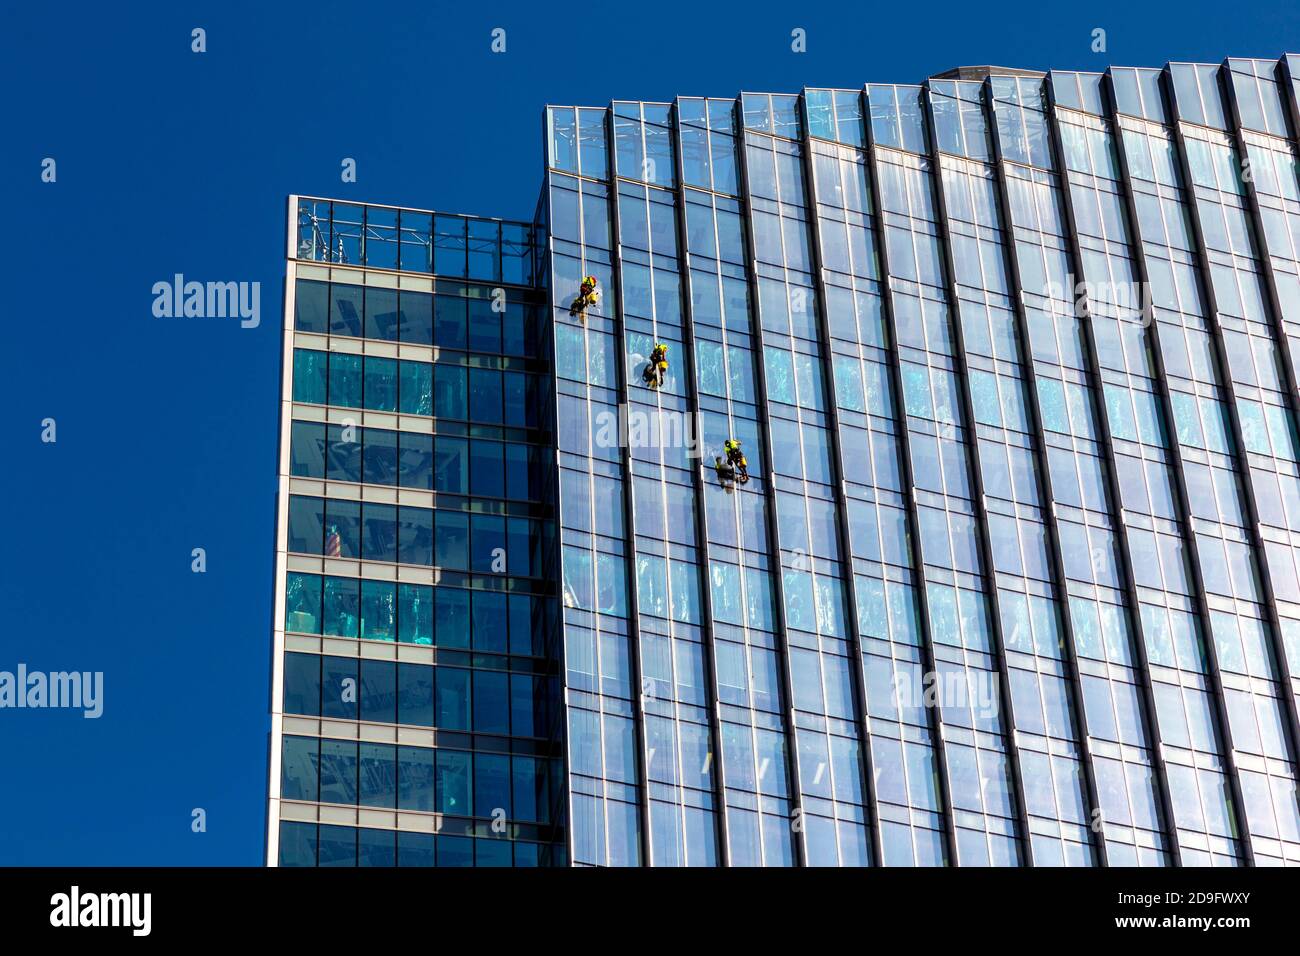 Window cleaners abseiling from a contemporary glass skyscraper cleaning windows, Warsaw, Poland Stock Photo